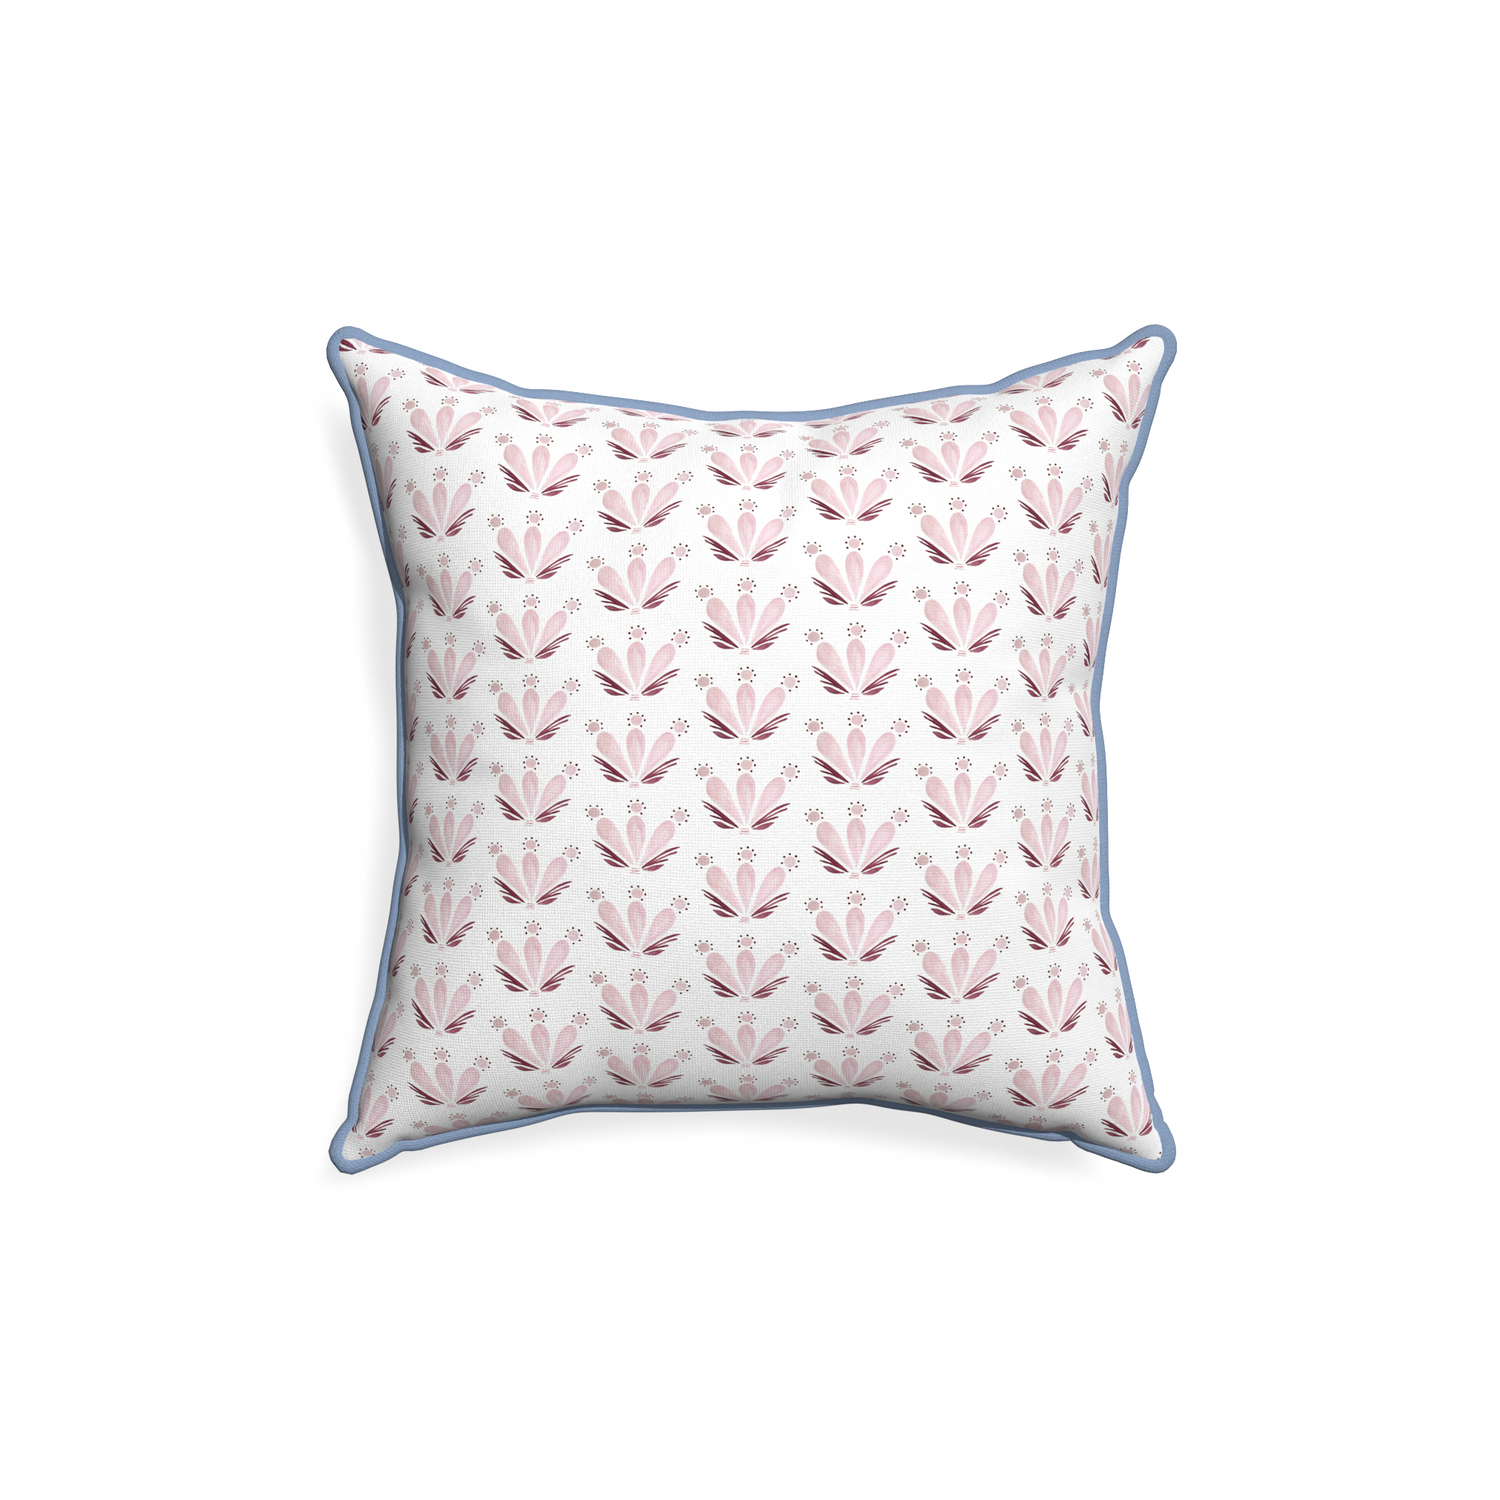 18-square serena pink custom pink & burgundy drop repeat floralpillow with sky piping on white background